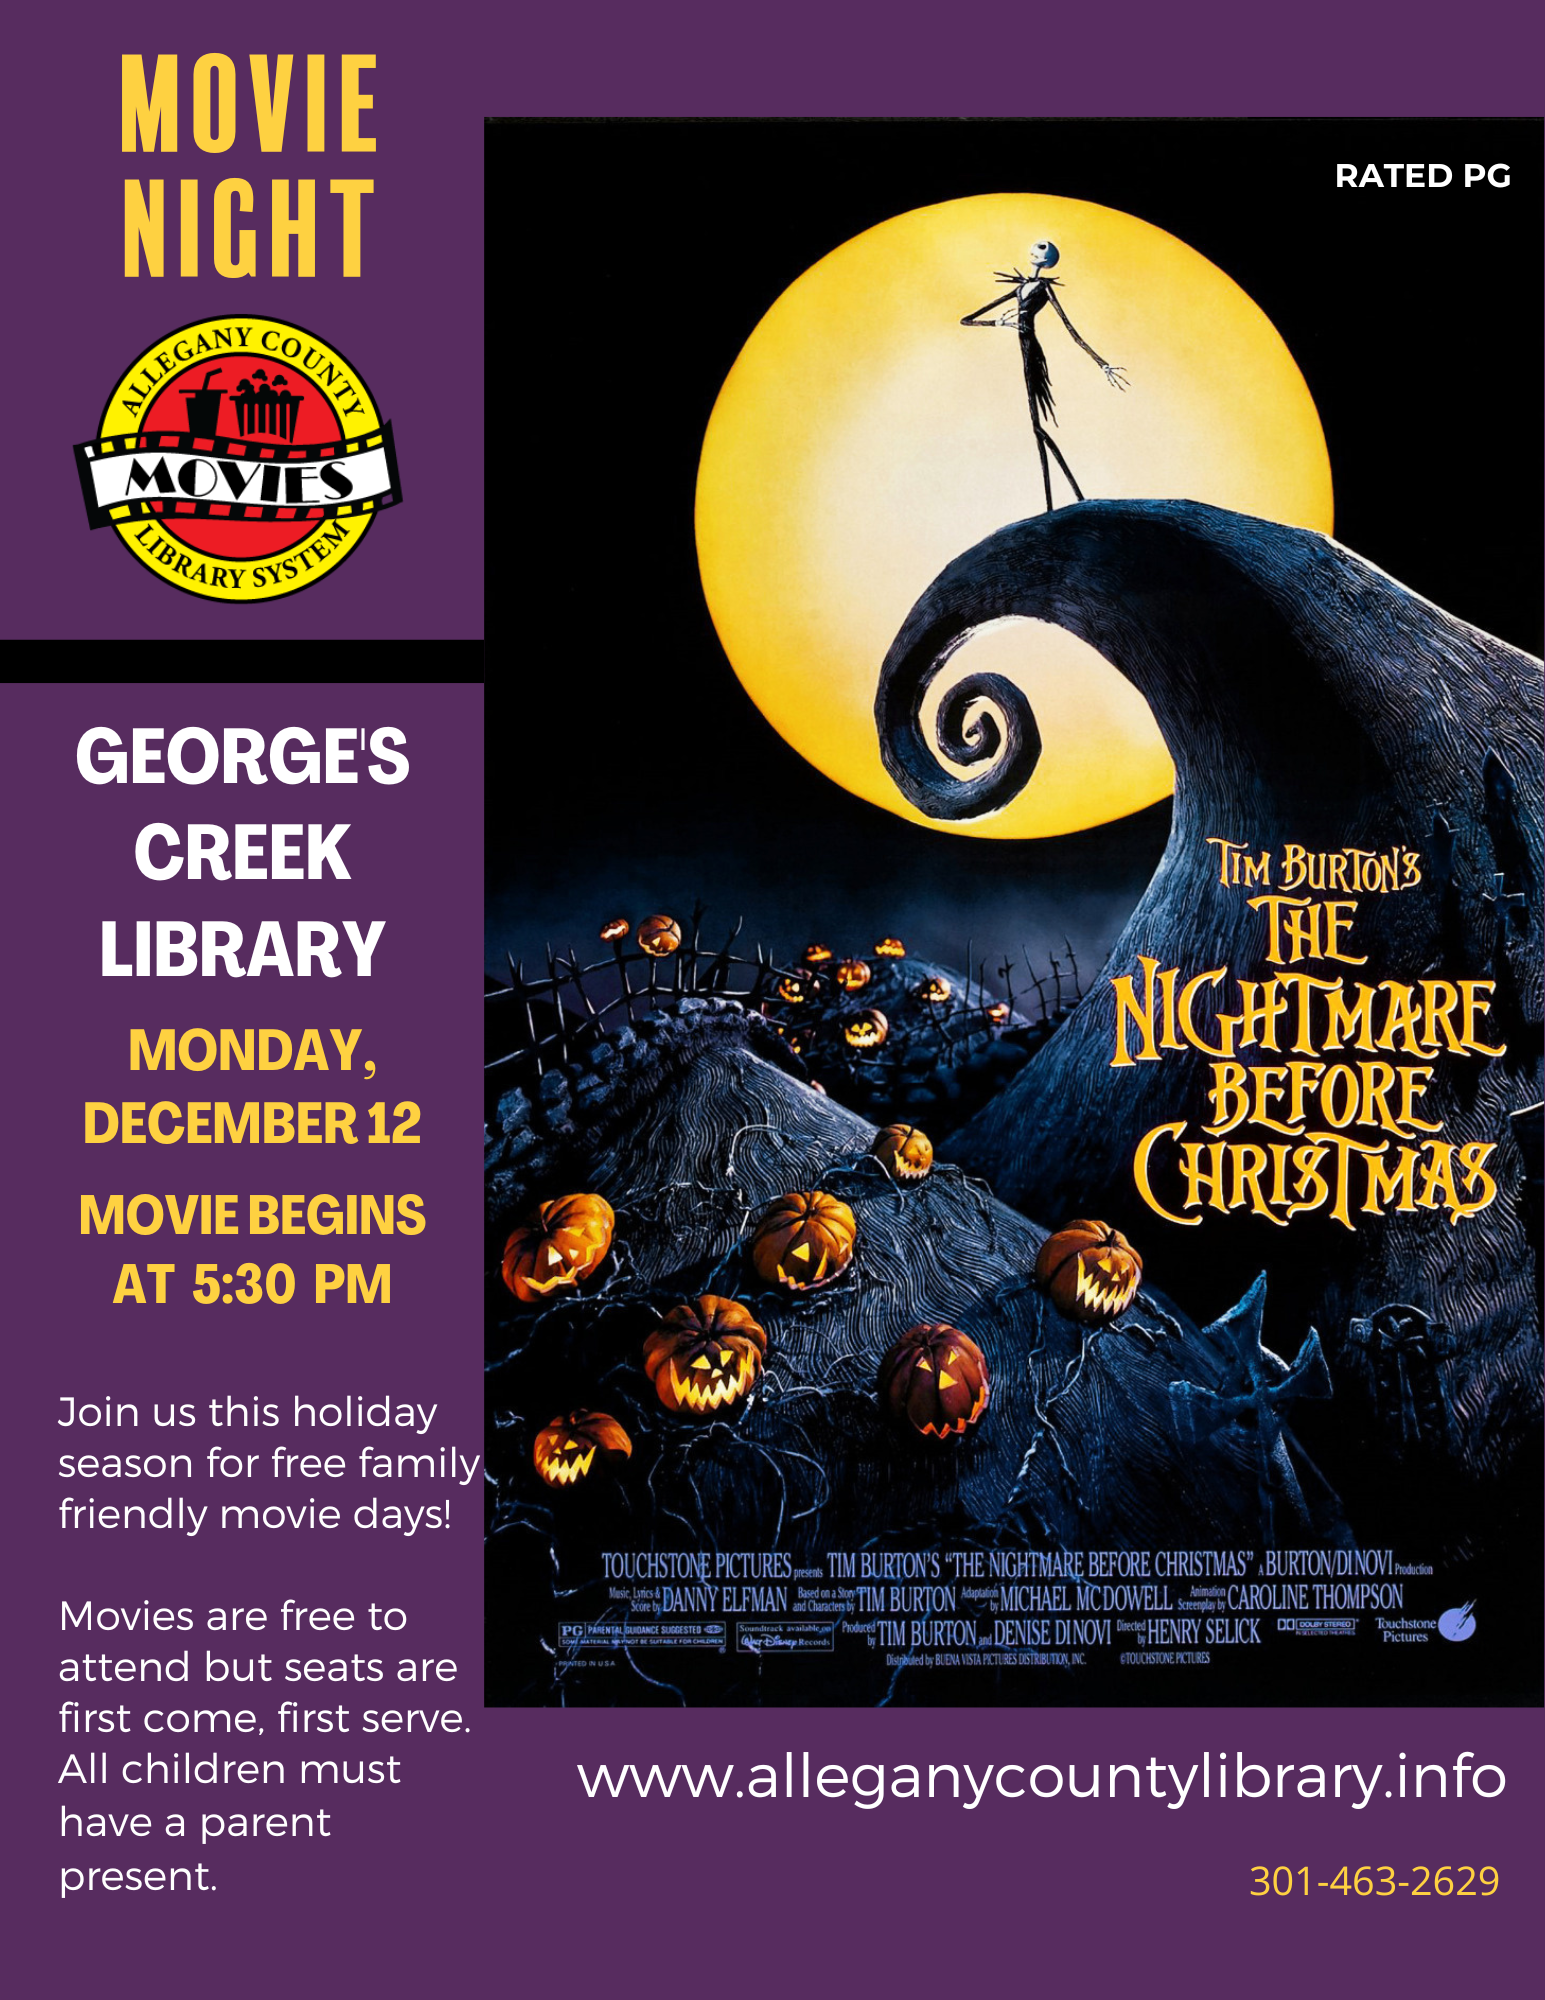 The Nightmare Before Christmas movie cover with event details